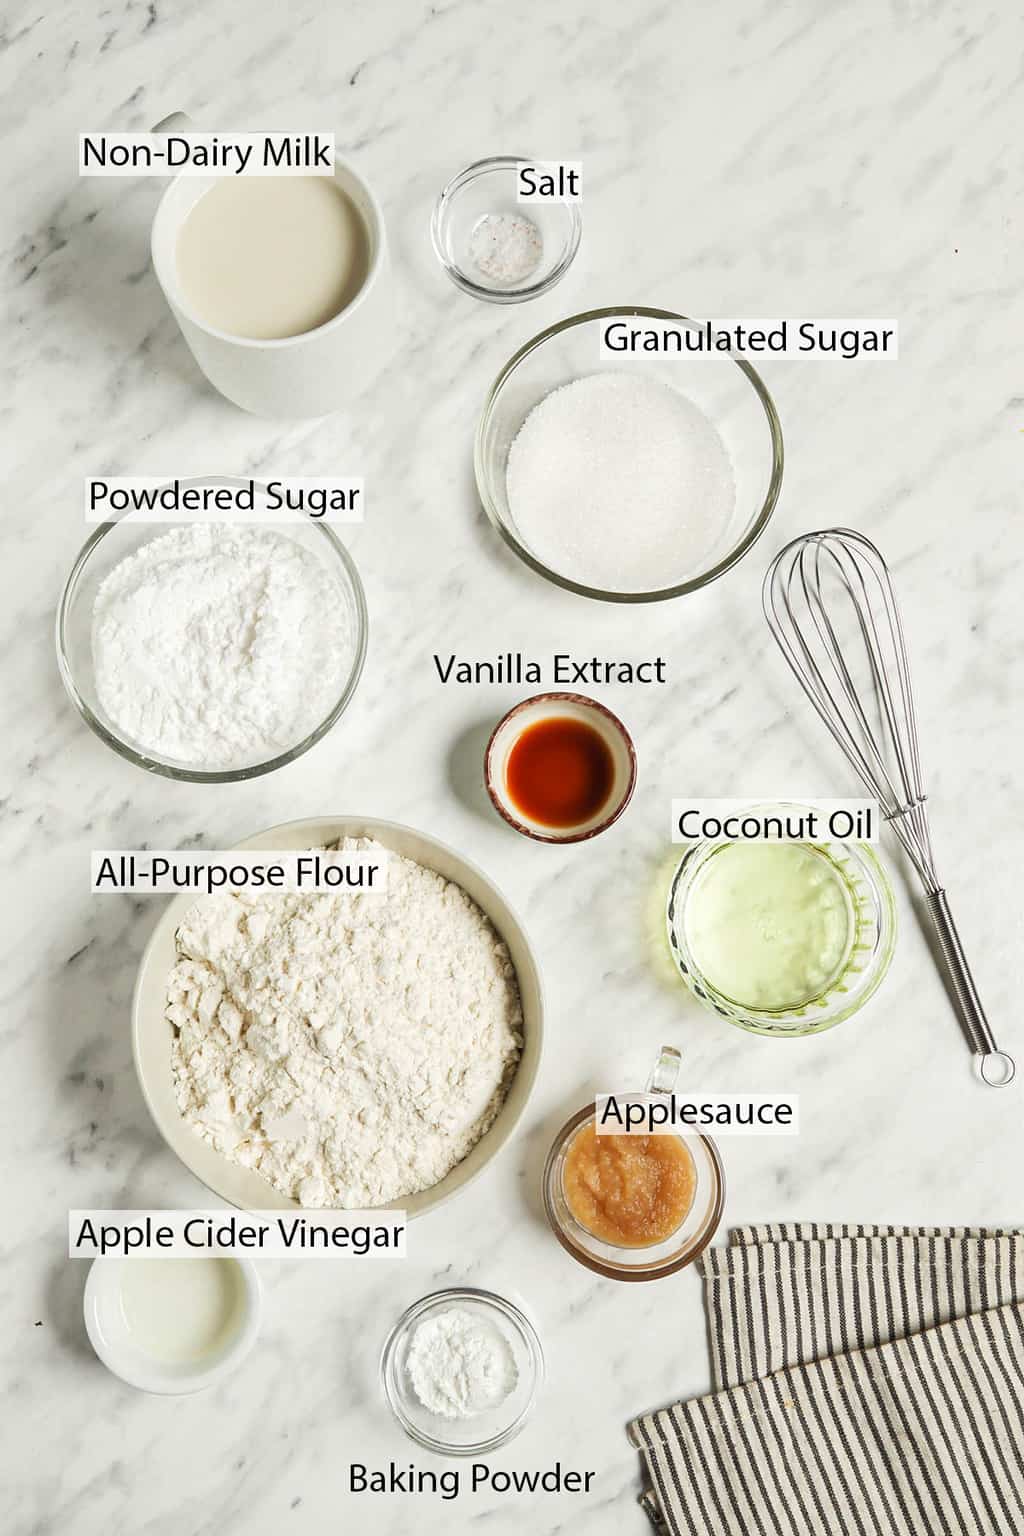 Ingredients for glazed doughnuts measured out and placed on a marble countertop. 